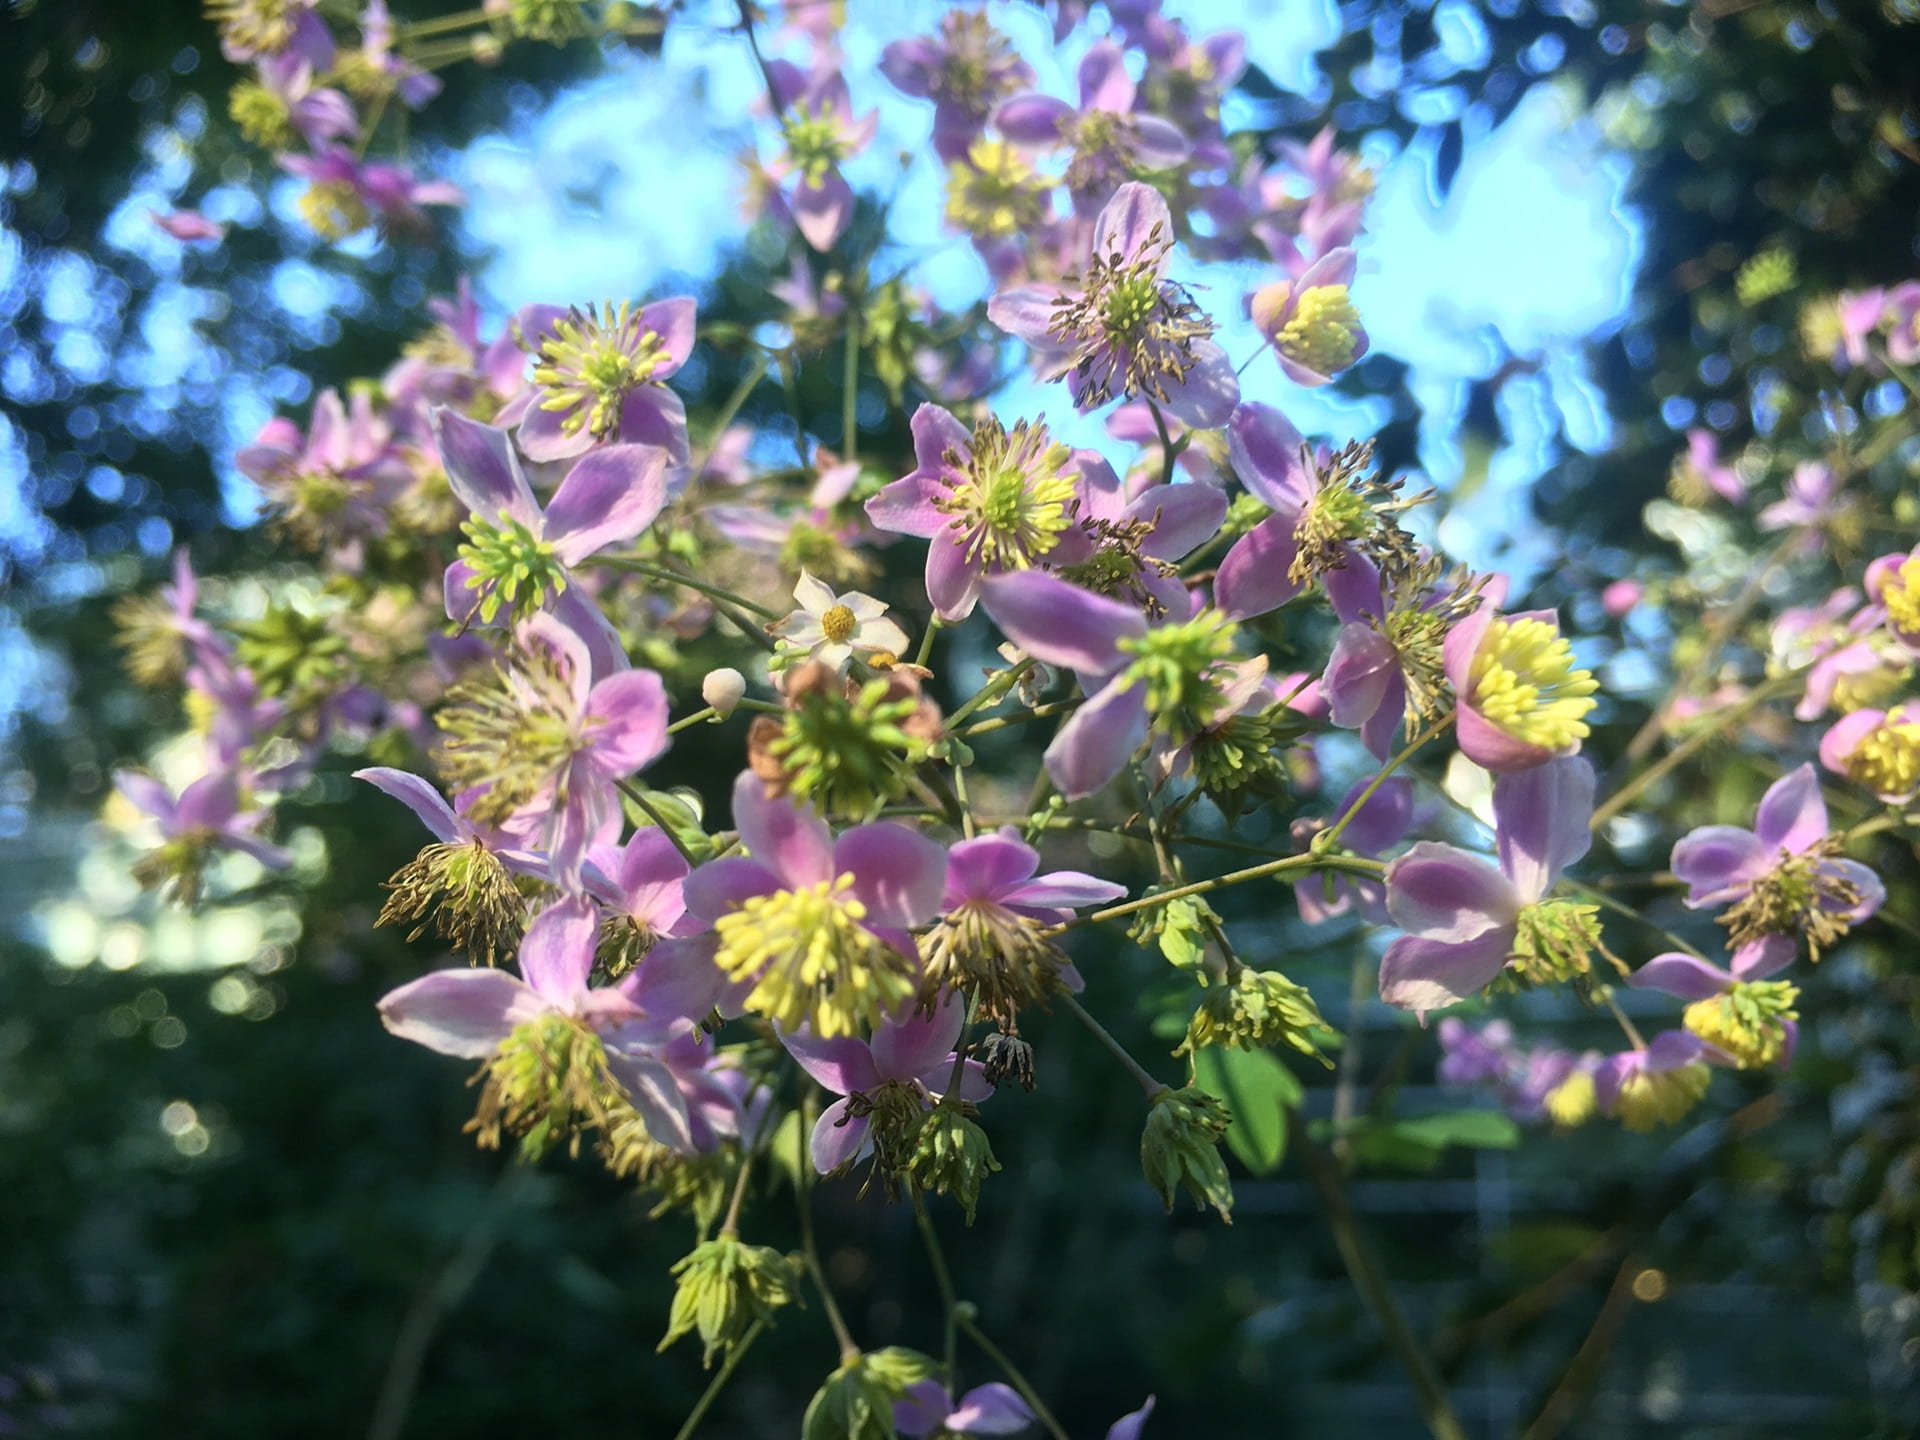 Thalictrum rochebruniatum flowers stand around six feet tall, allowing for an up close look.